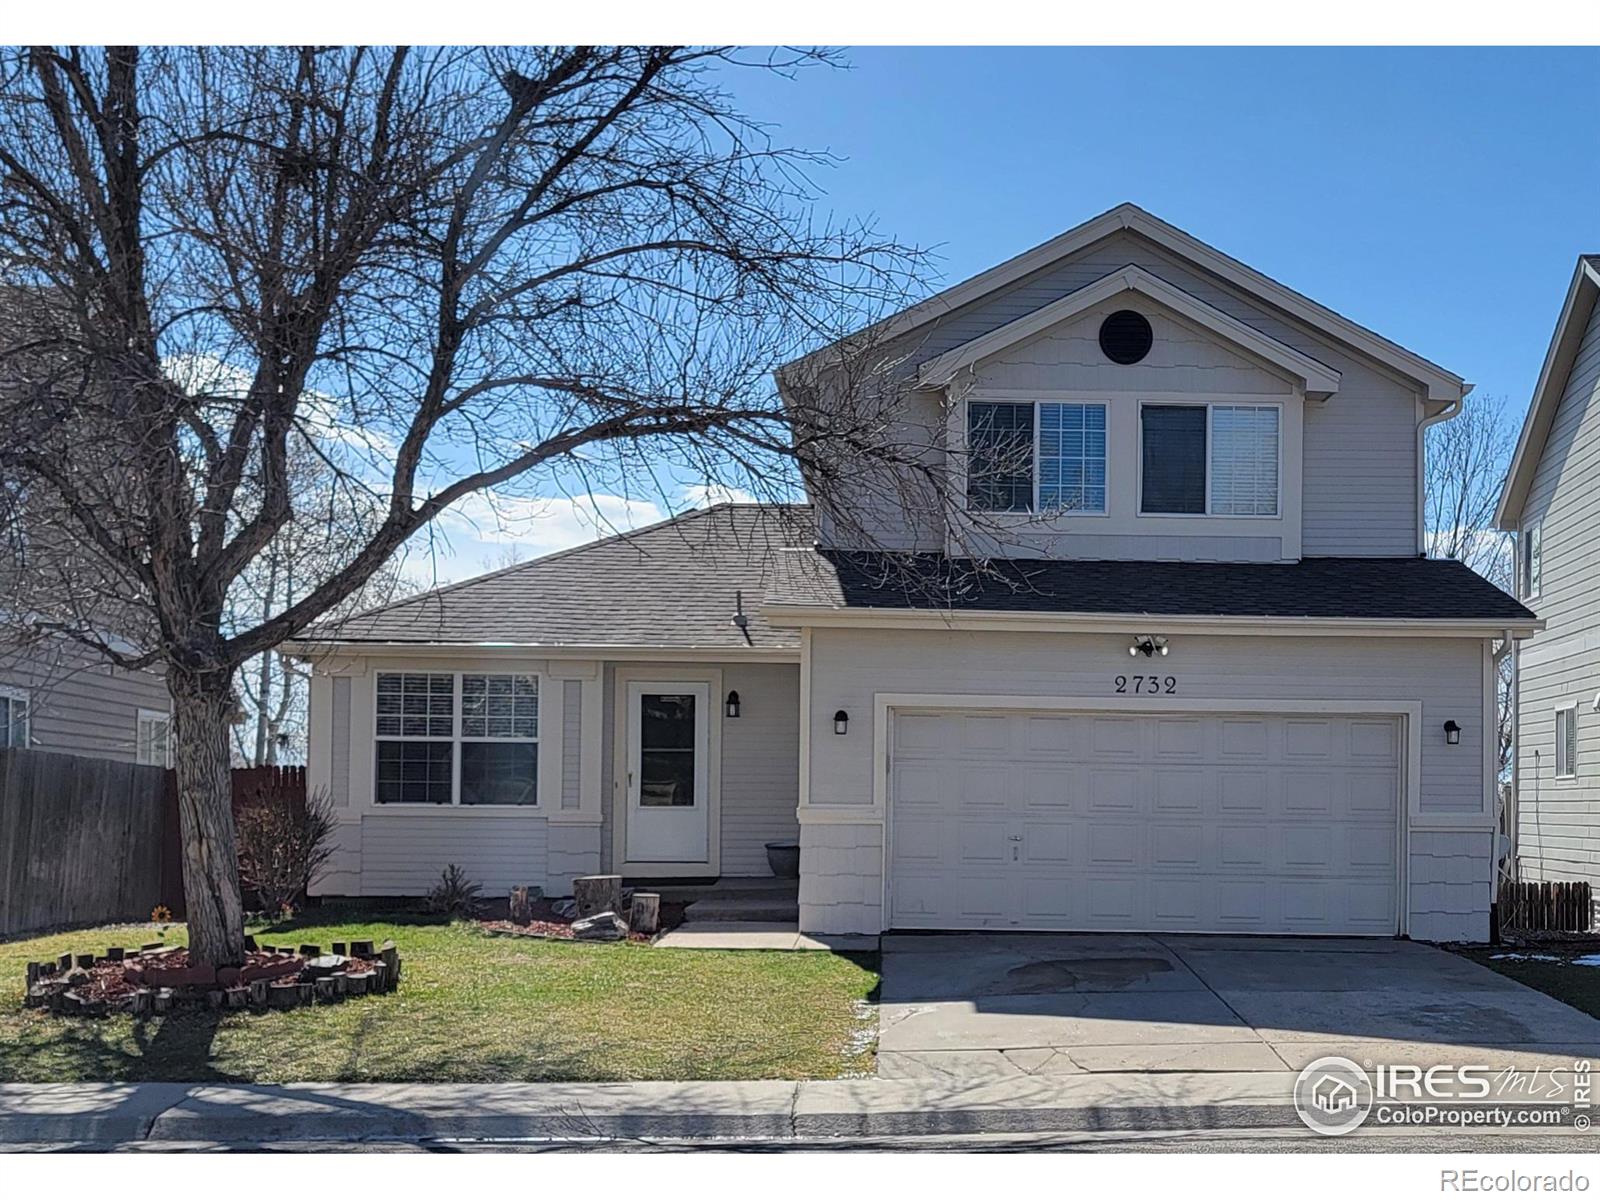 2732 E 132nd Place, thornton MLS: 4567891005511 Beds: 3 Baths: 3 Price: $585,000